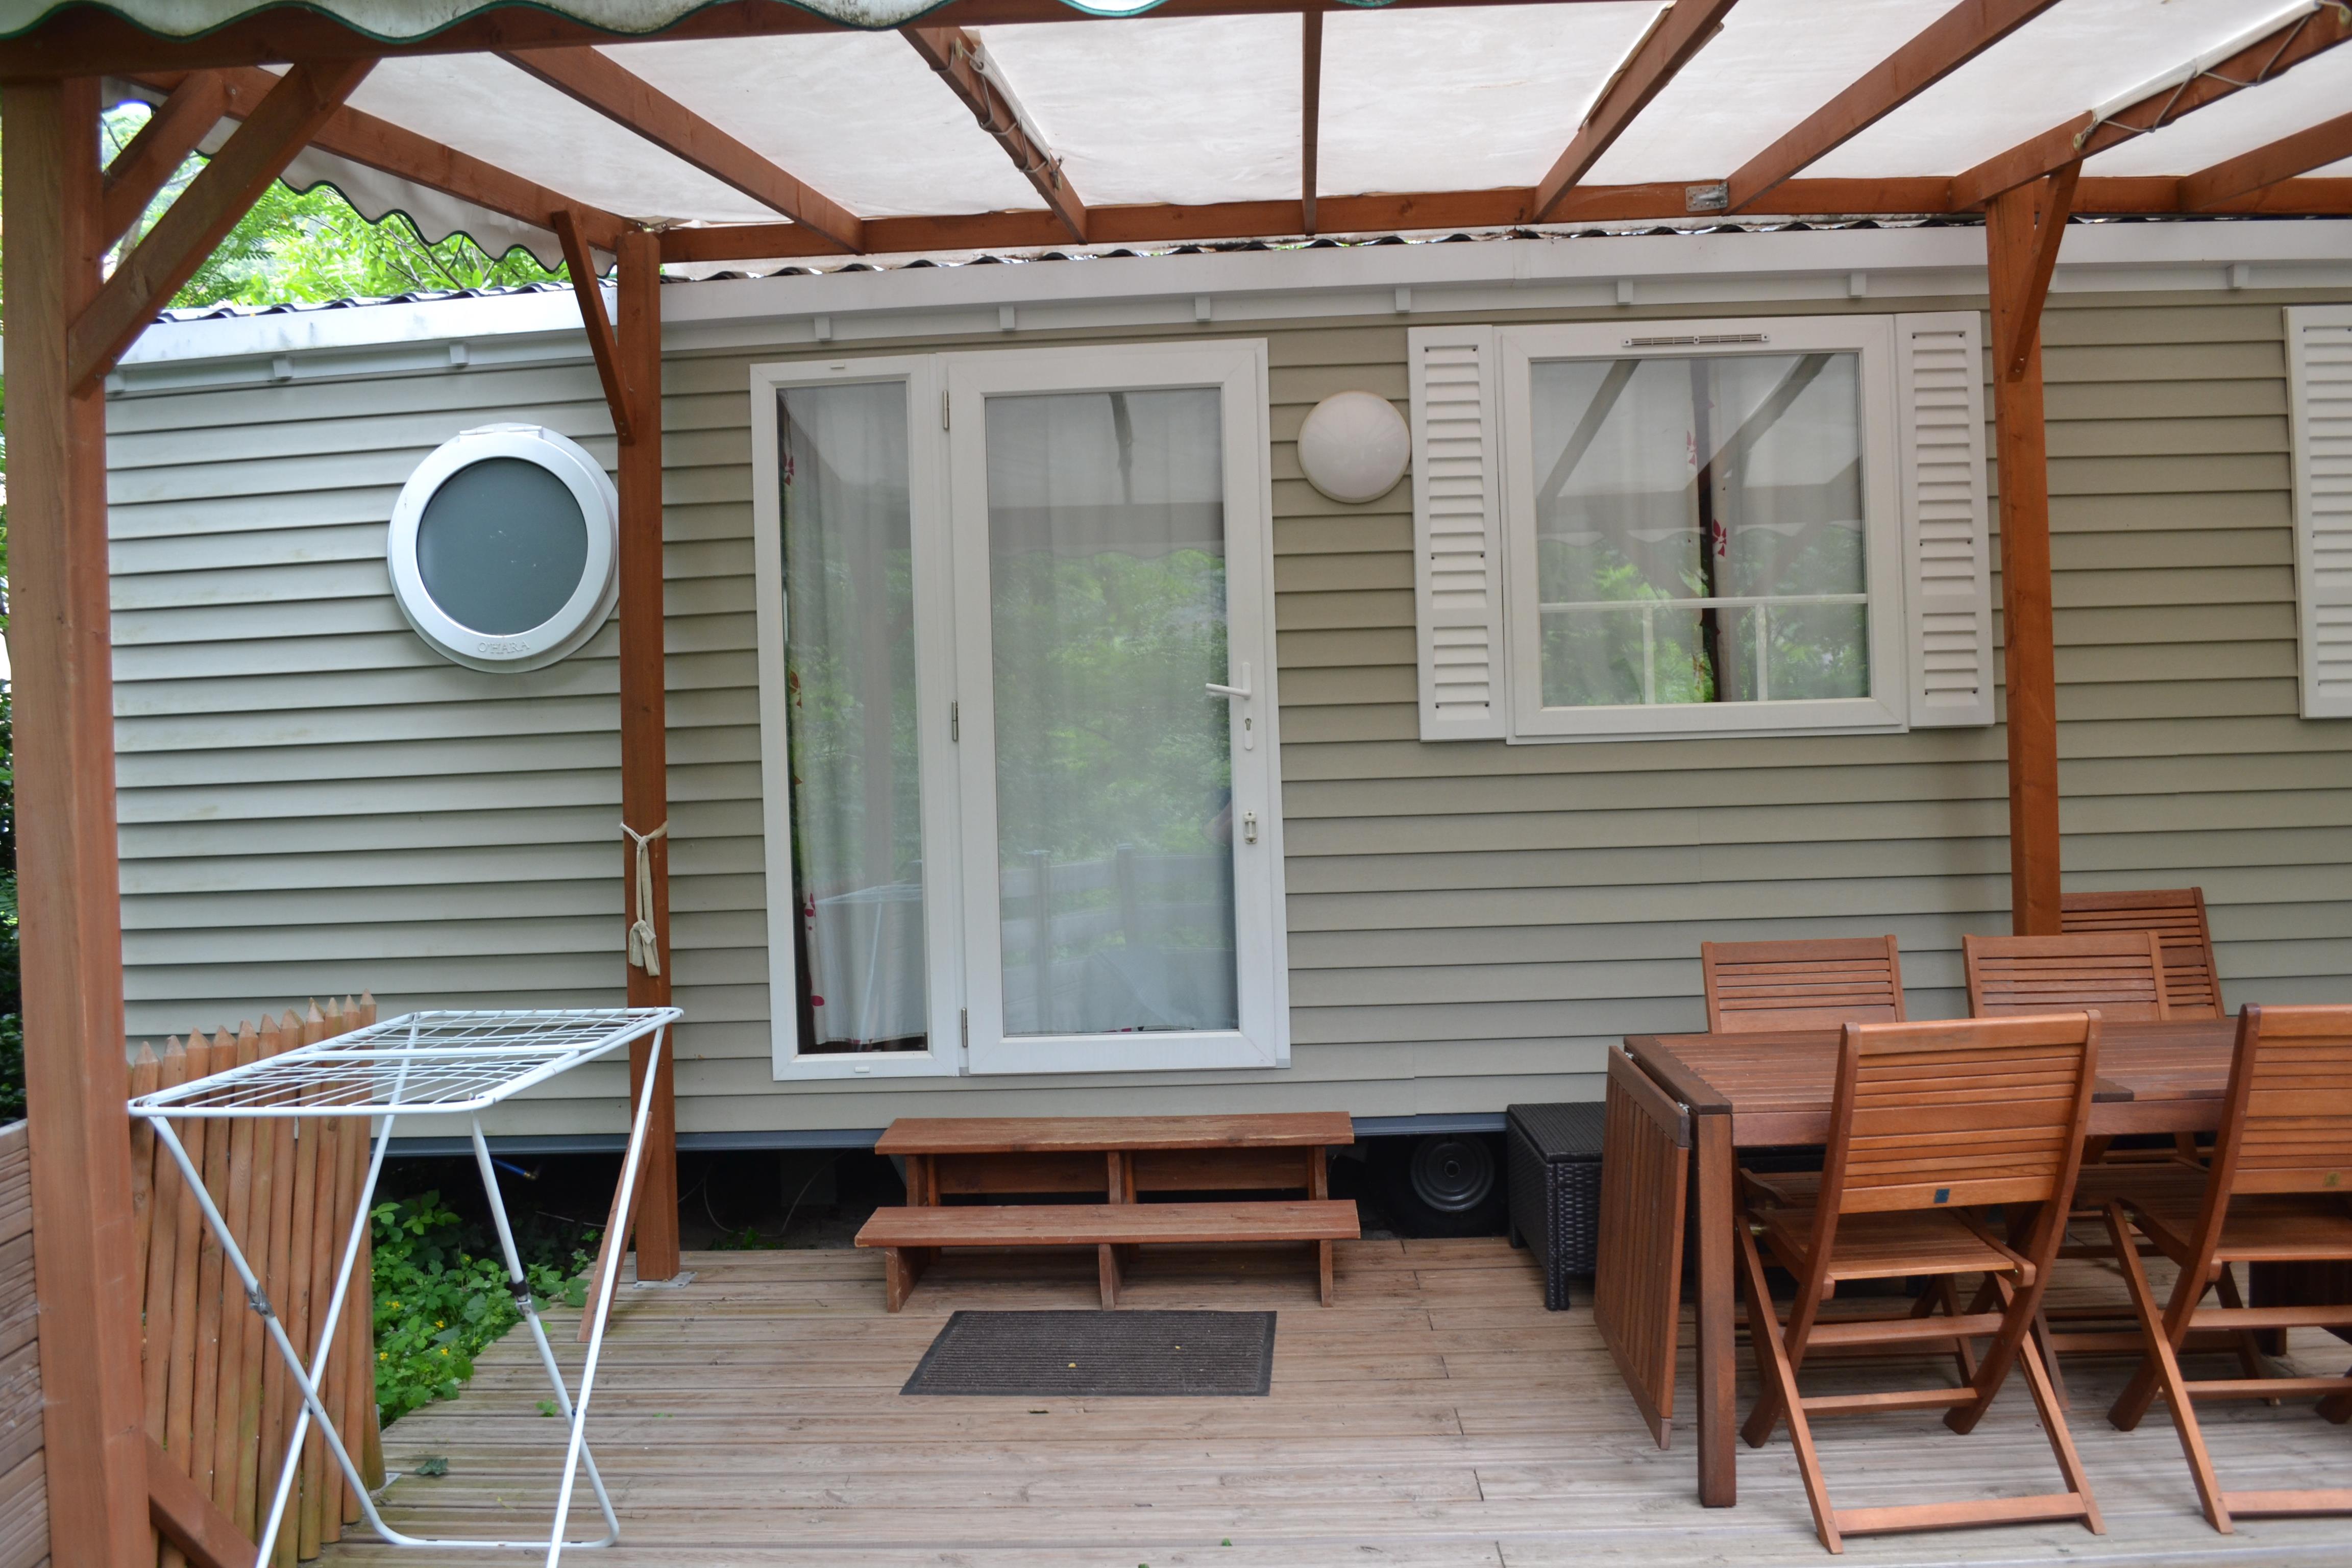 Accommodation - Mobilhome 3 Bedrooms + Sheltered Terrace - Camping Le Barutel